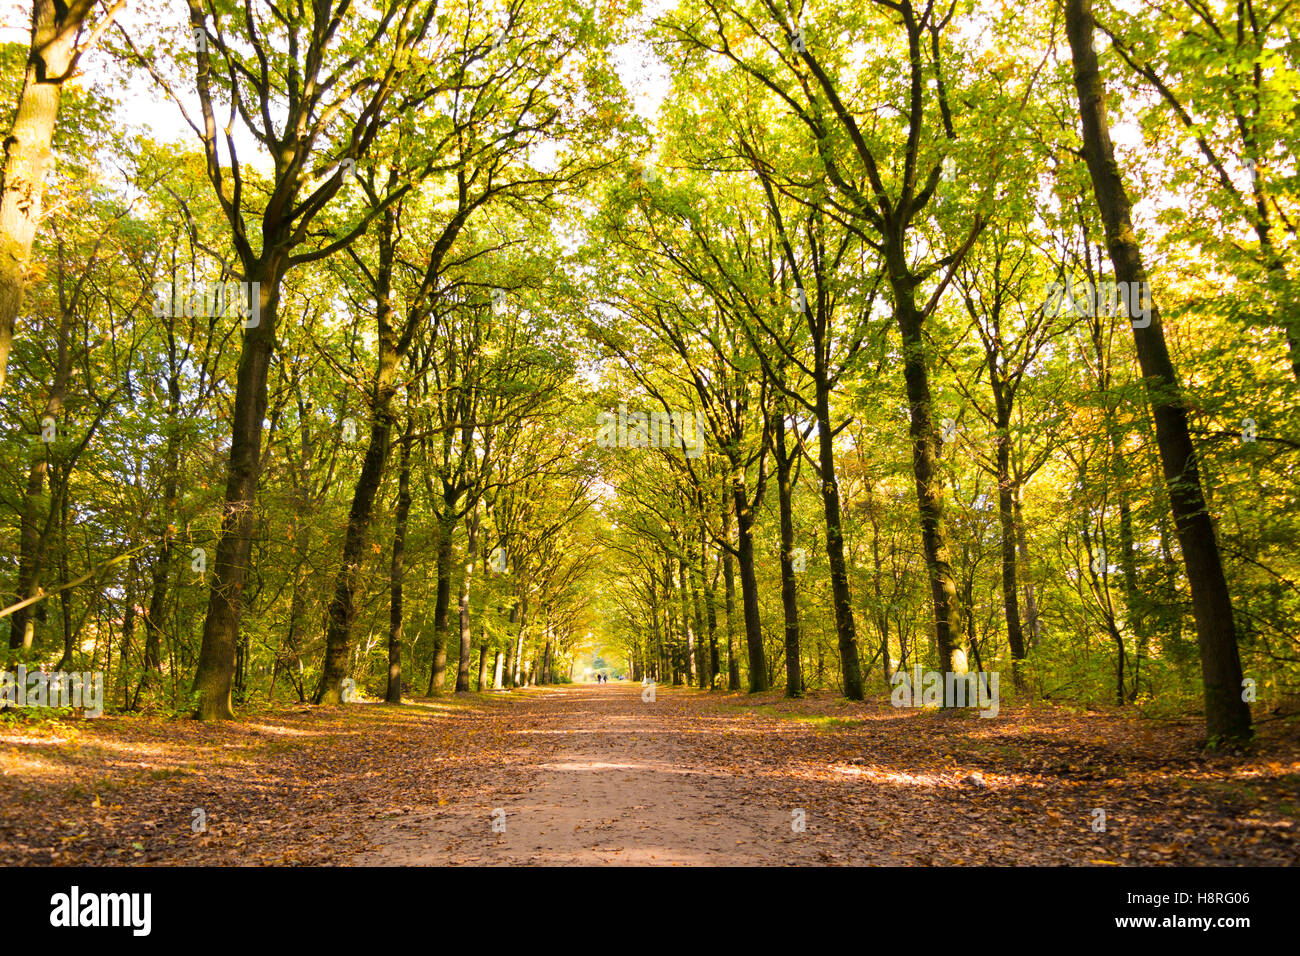 Dirt road covered with fallen leaves and tree trunks on a sunny day in autumn, 's Graveland, Netherlands Stock Photo